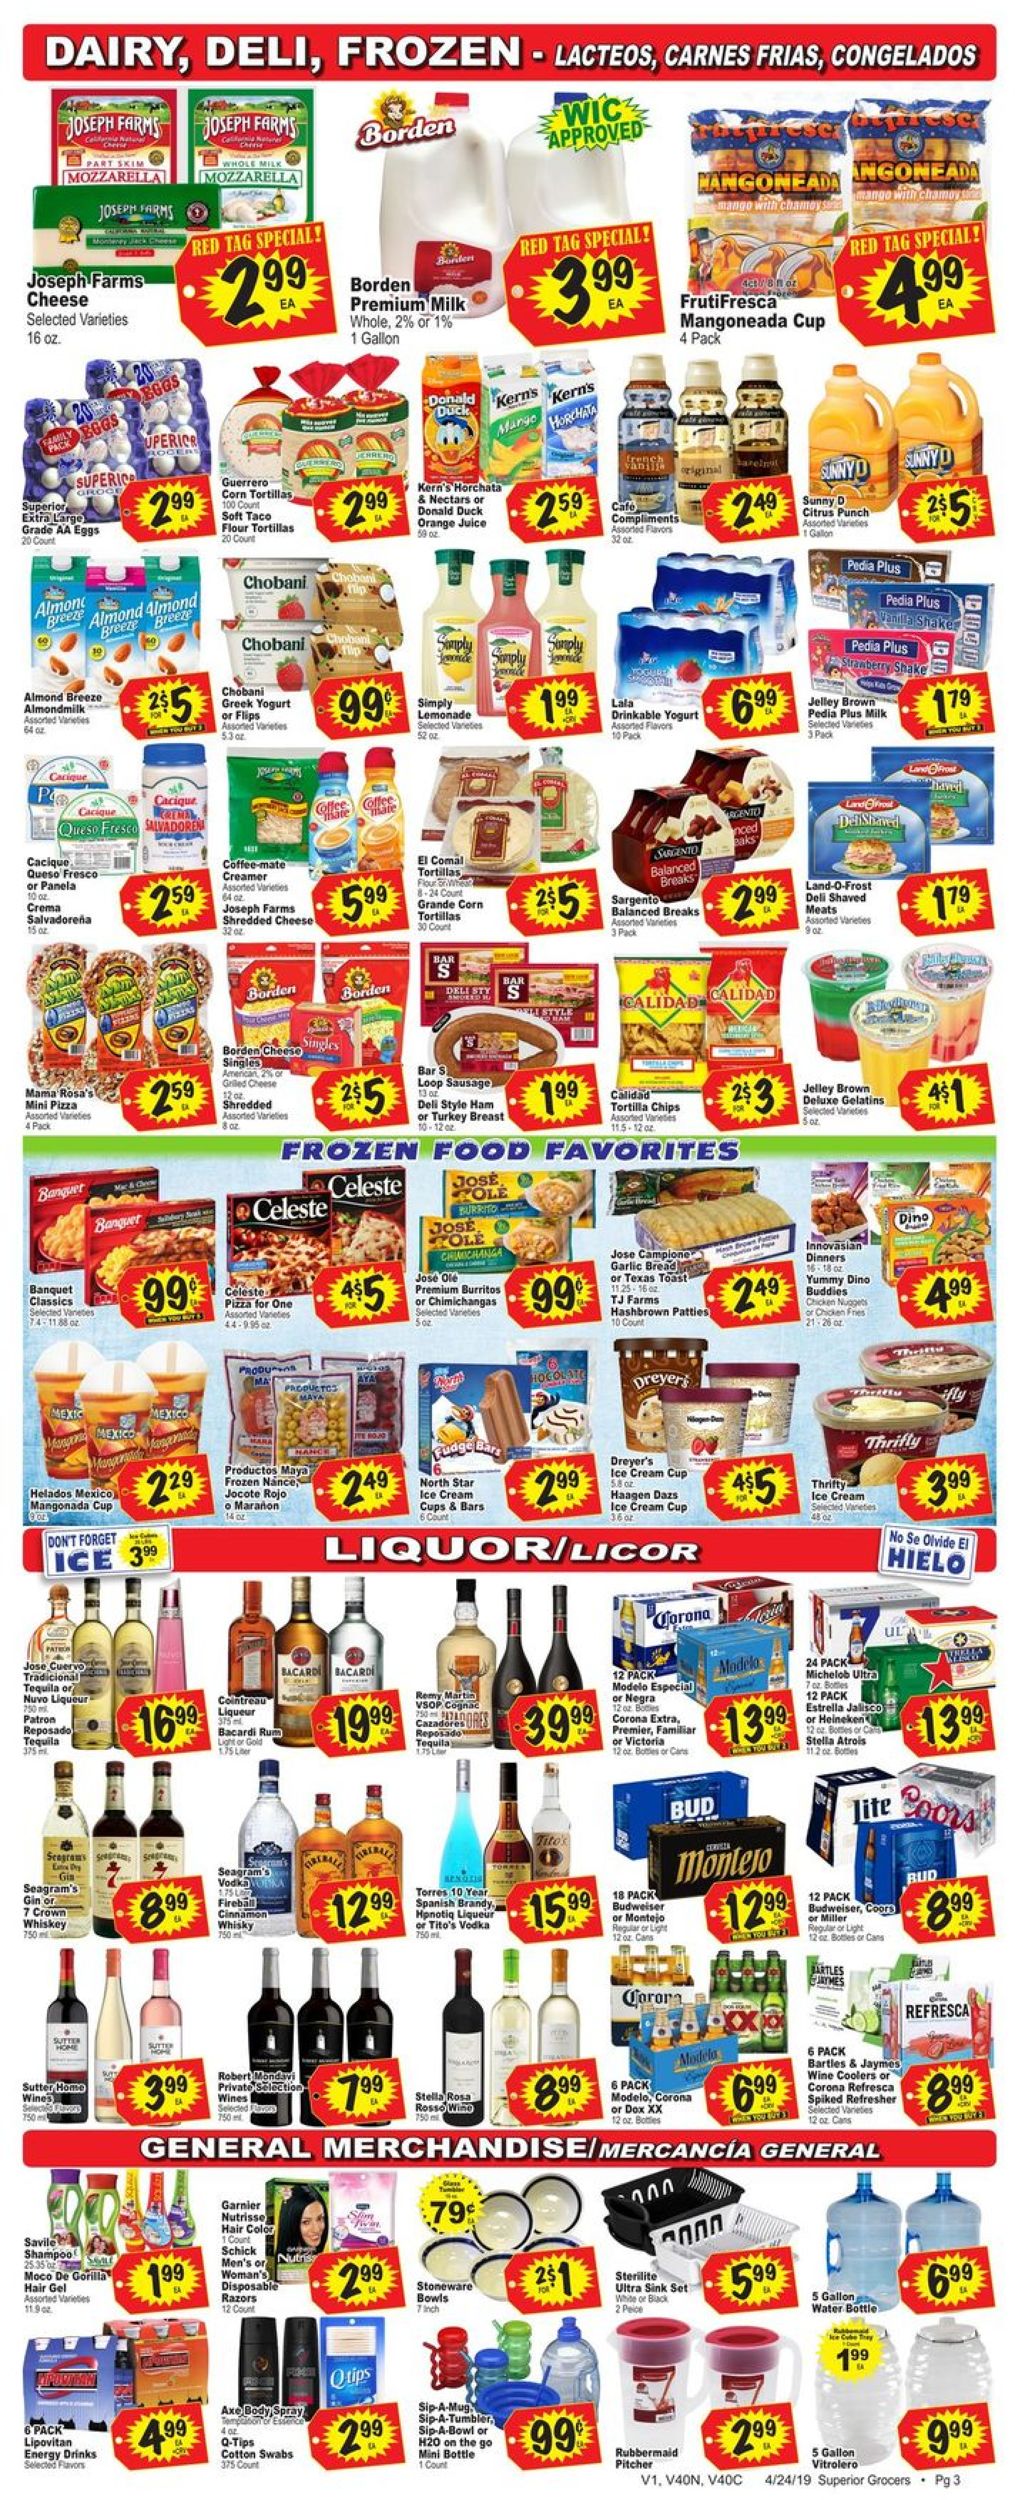 Catalogue Superior Grocers from 04/24/2019